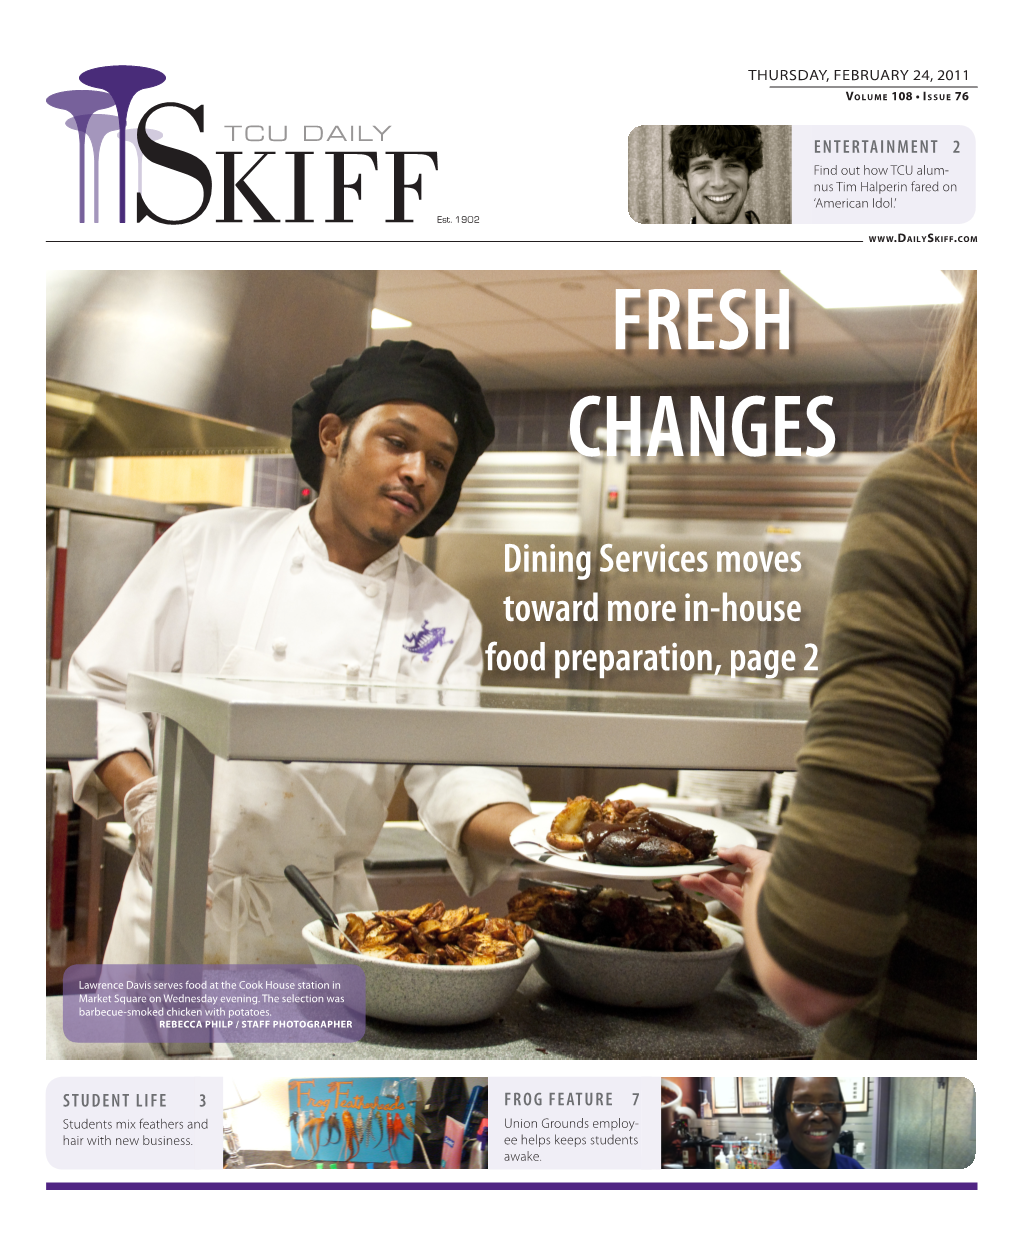 Dining Services Moves Toward More In-House Food Preparation, Page 2